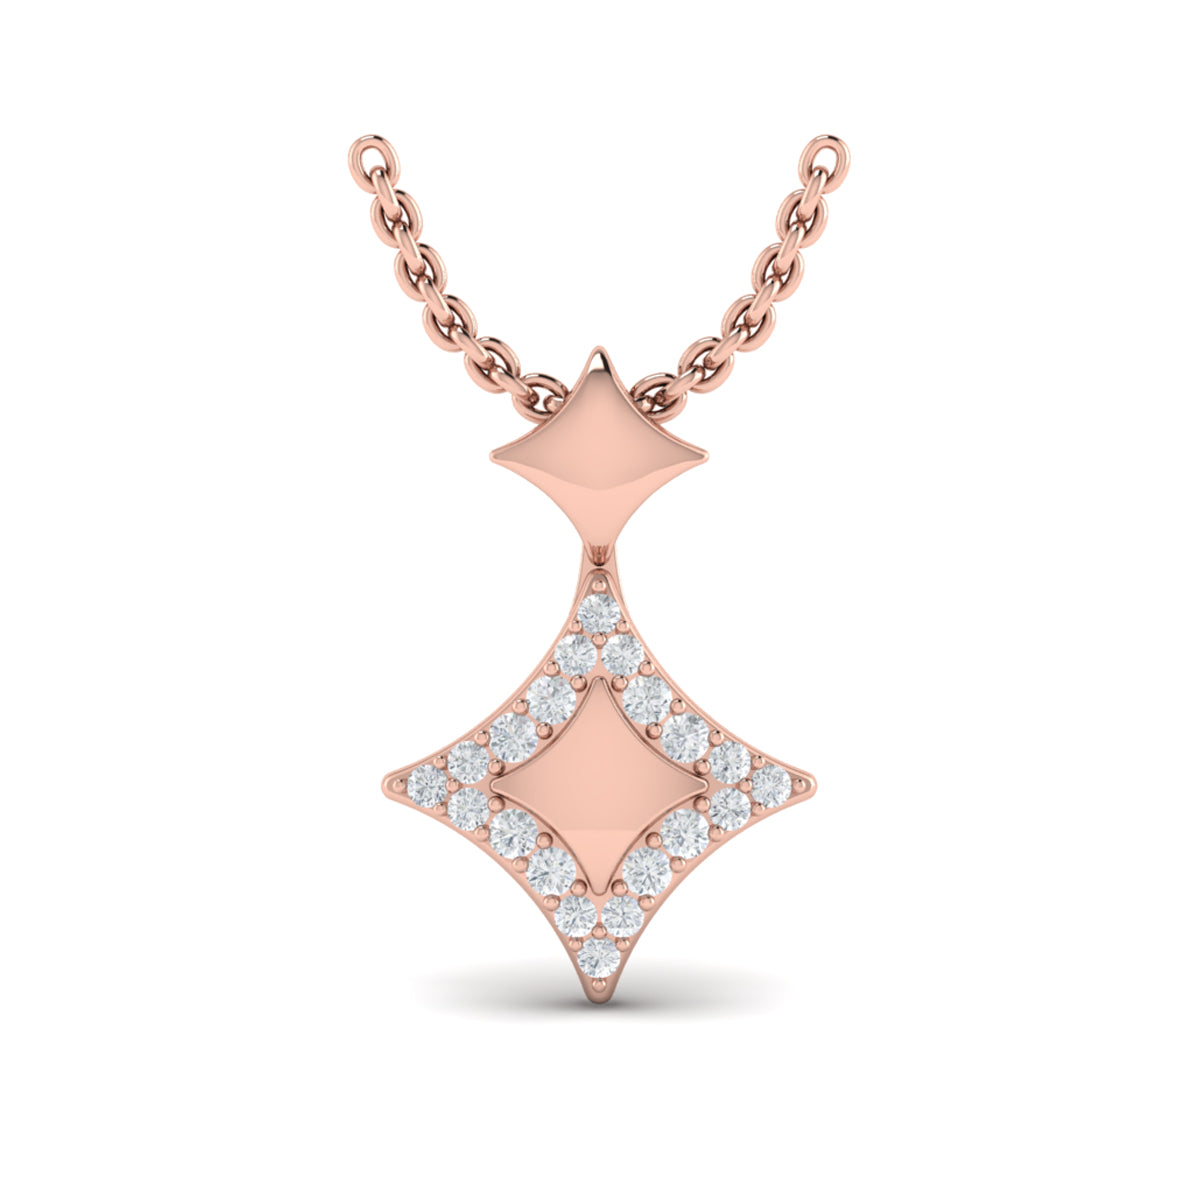 Louis Vuitton Pre-owned 18kt Rose Gold Blossom Bb Diamond Pendant Necklace - Pink